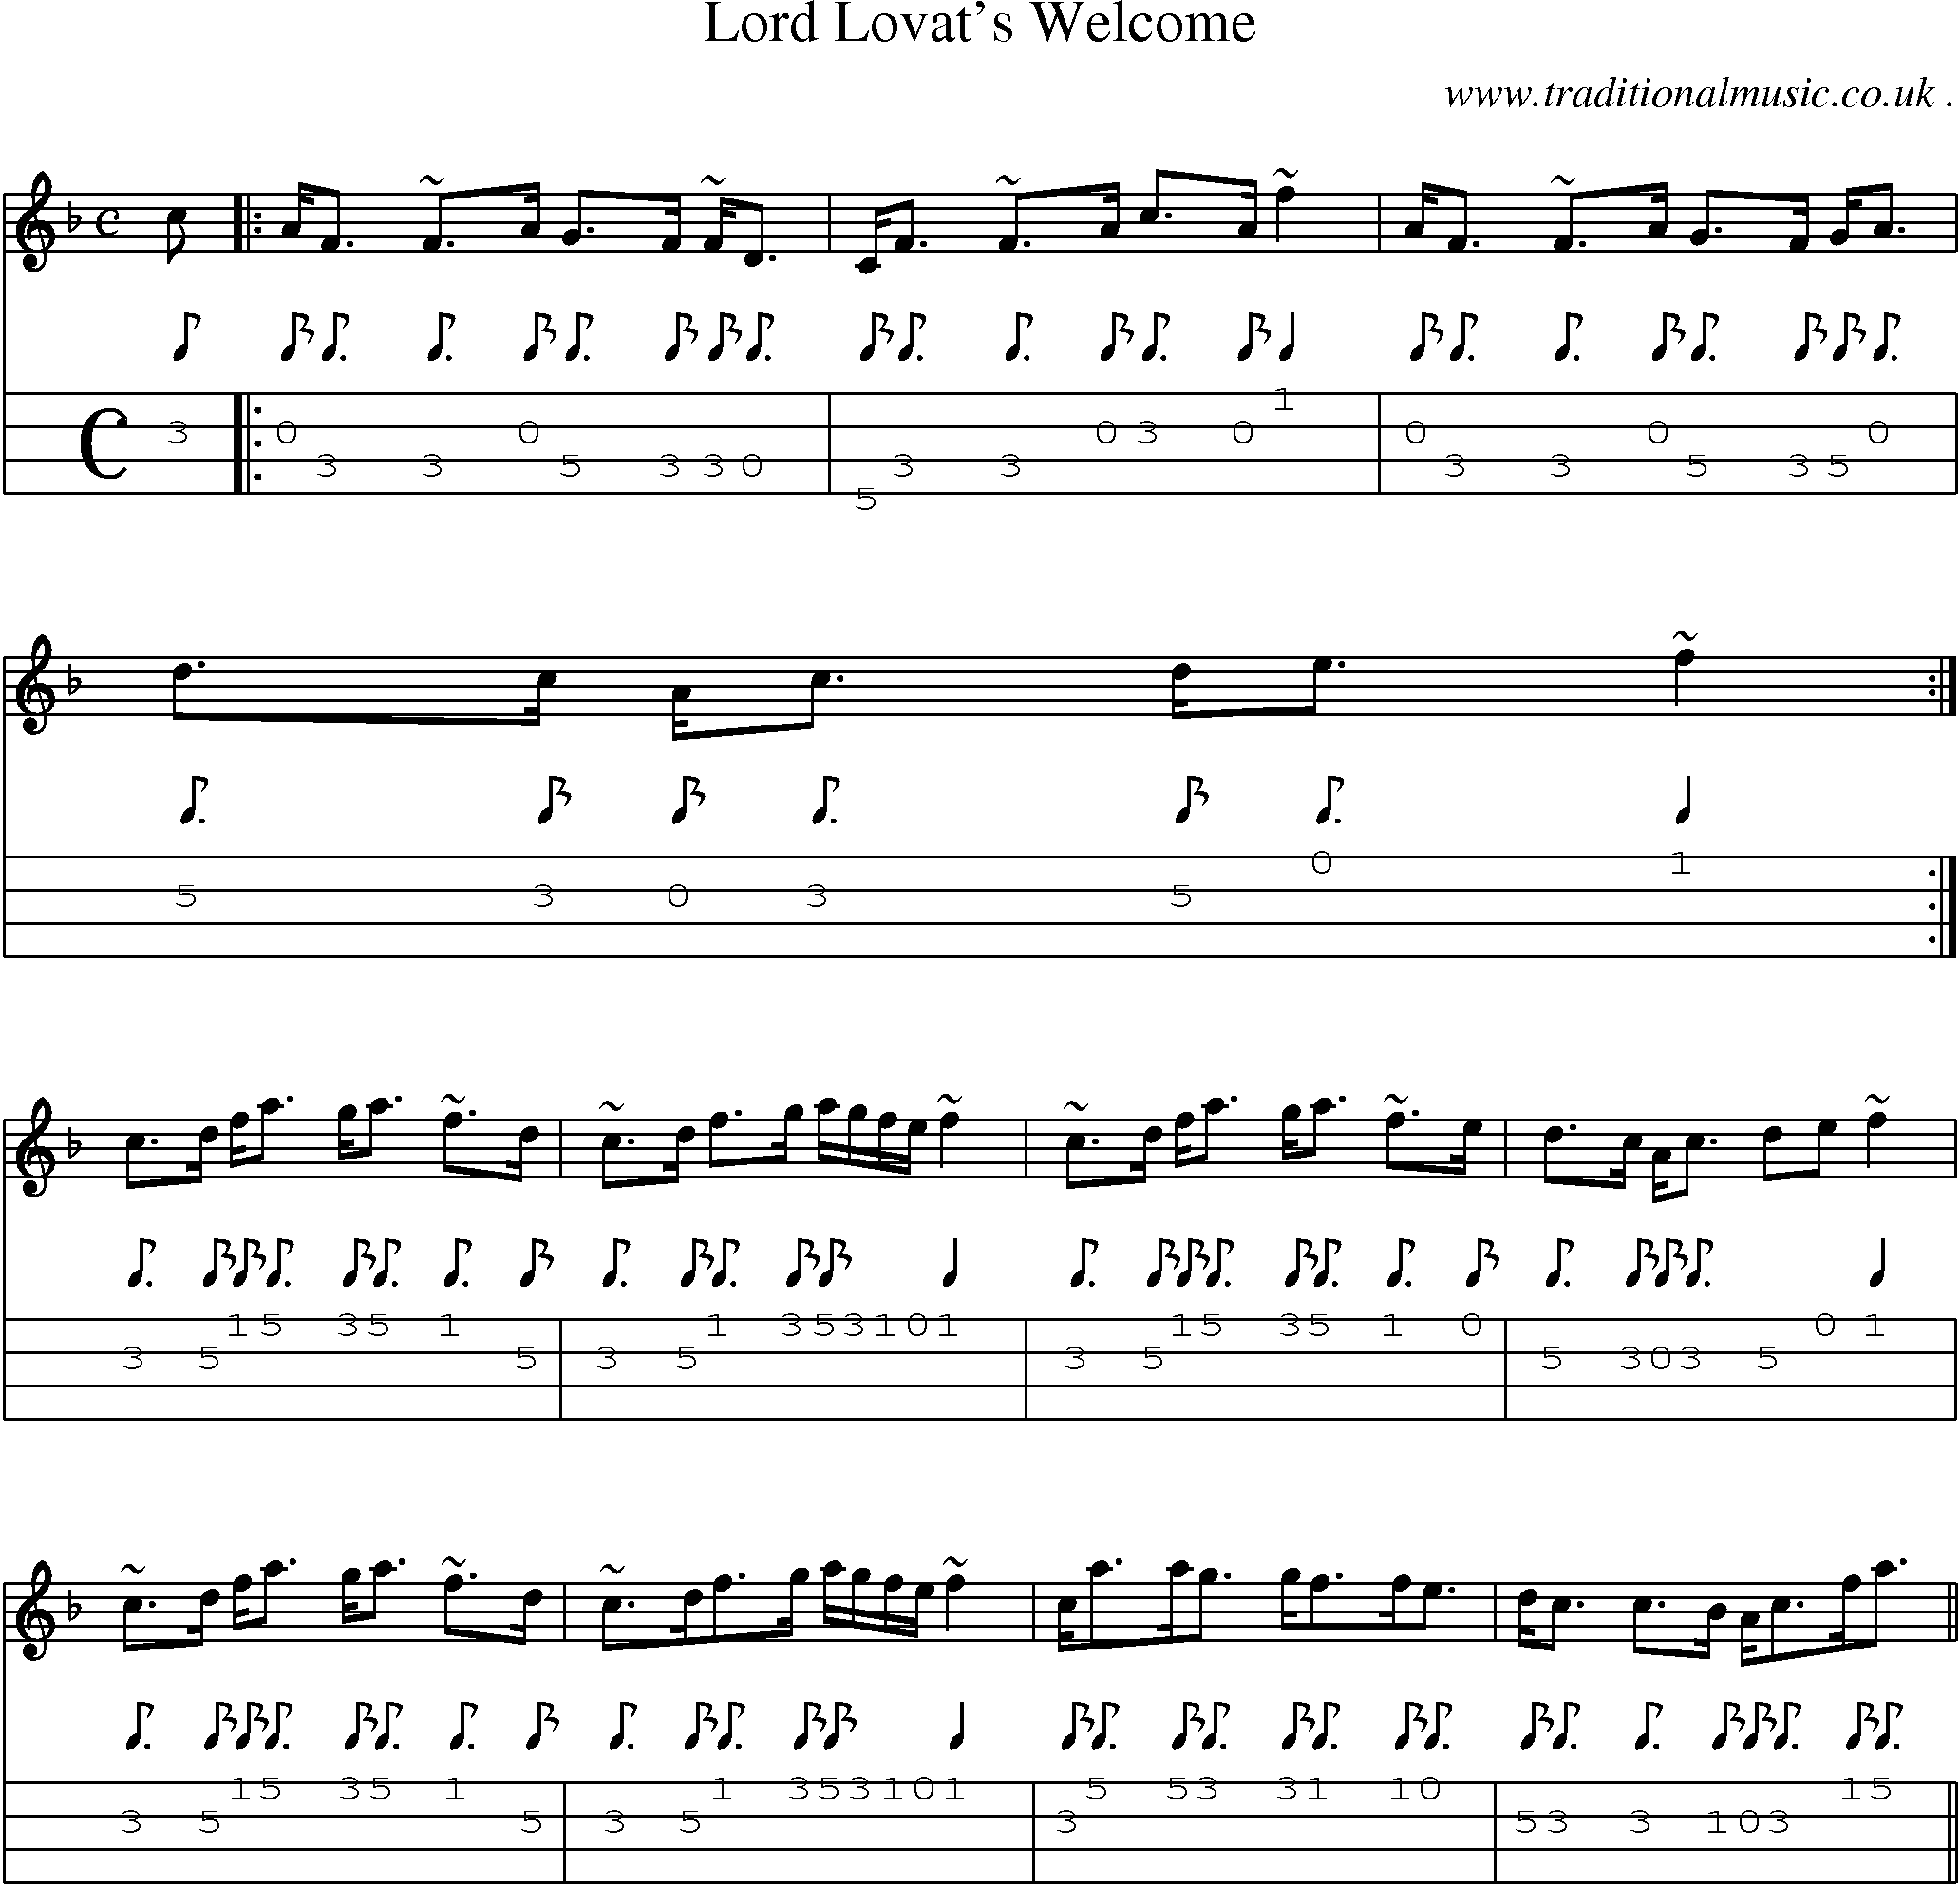 Sheet-music  score, Chords and Mandolin Tabs for Lord Lovats Welcome